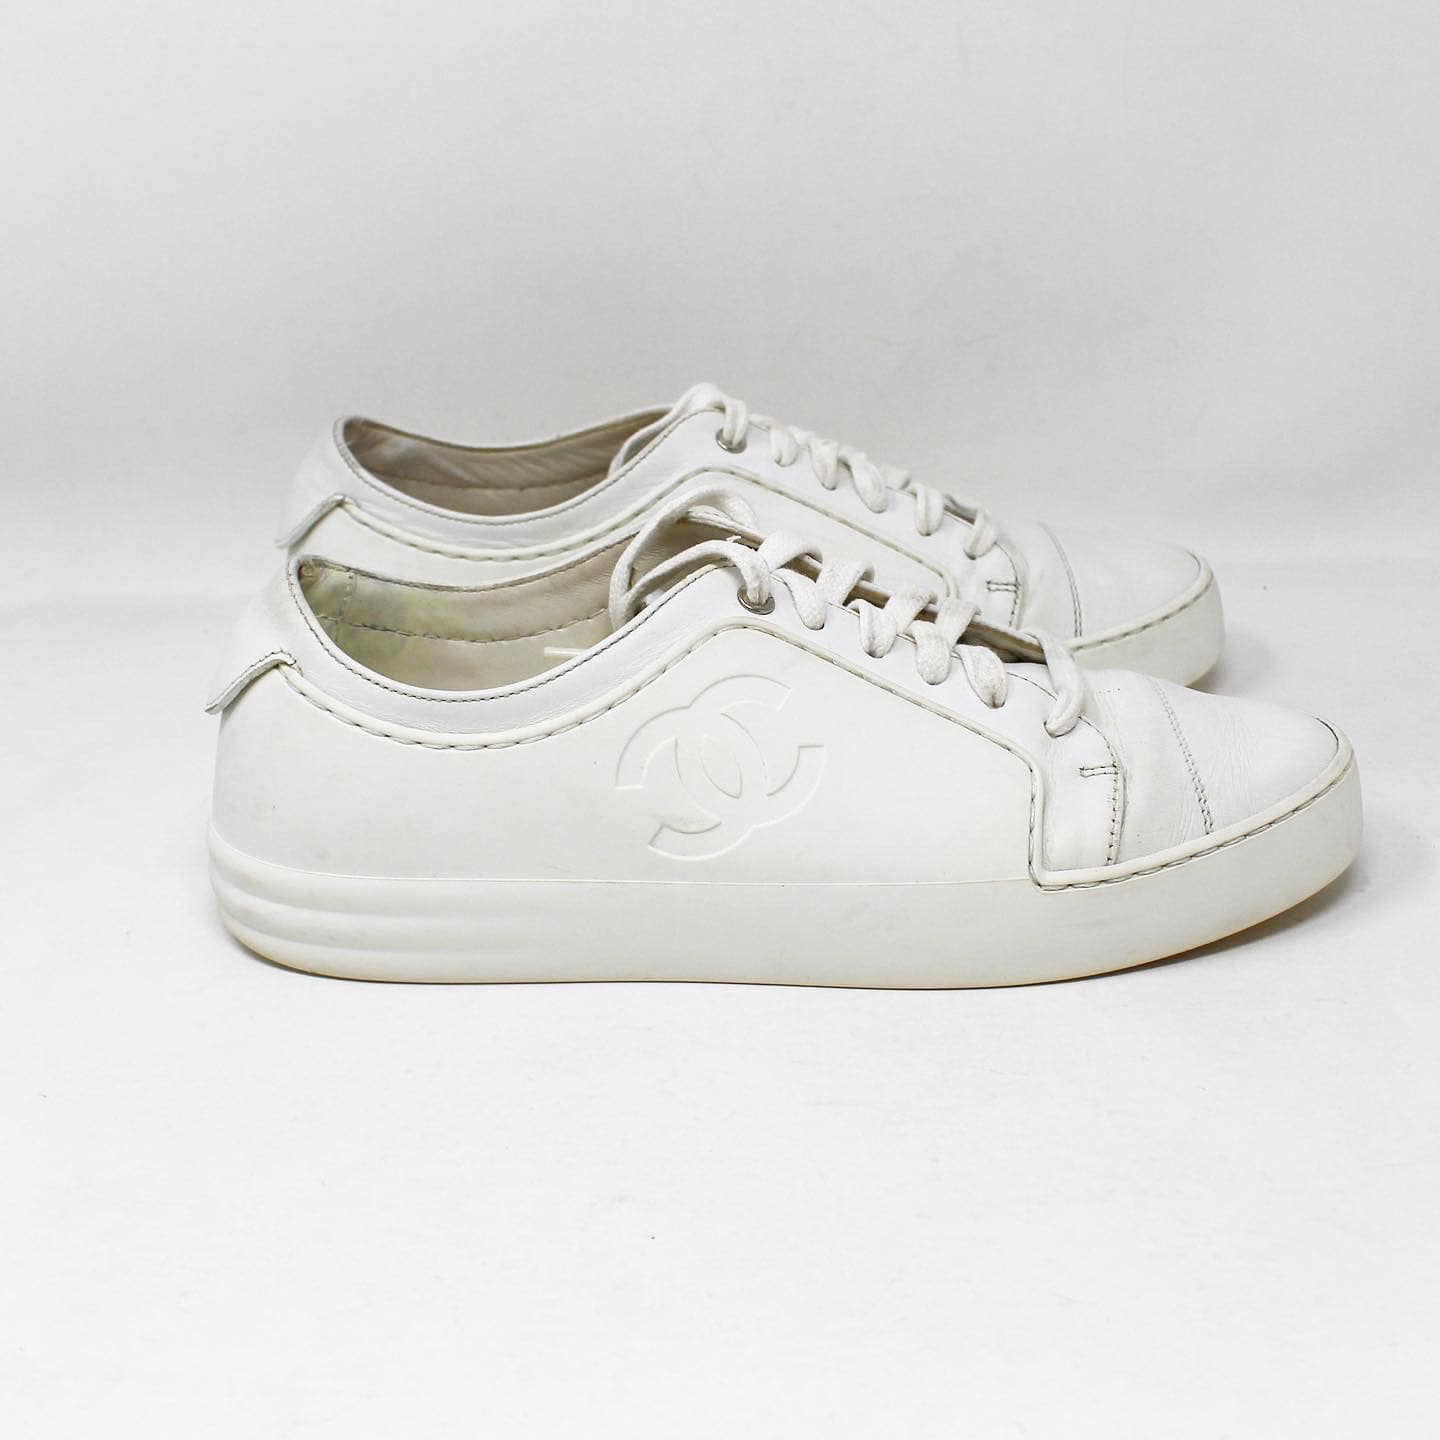 CHANEL #42876 White Leather Trainers Sneakers (US 6 EU 36) b